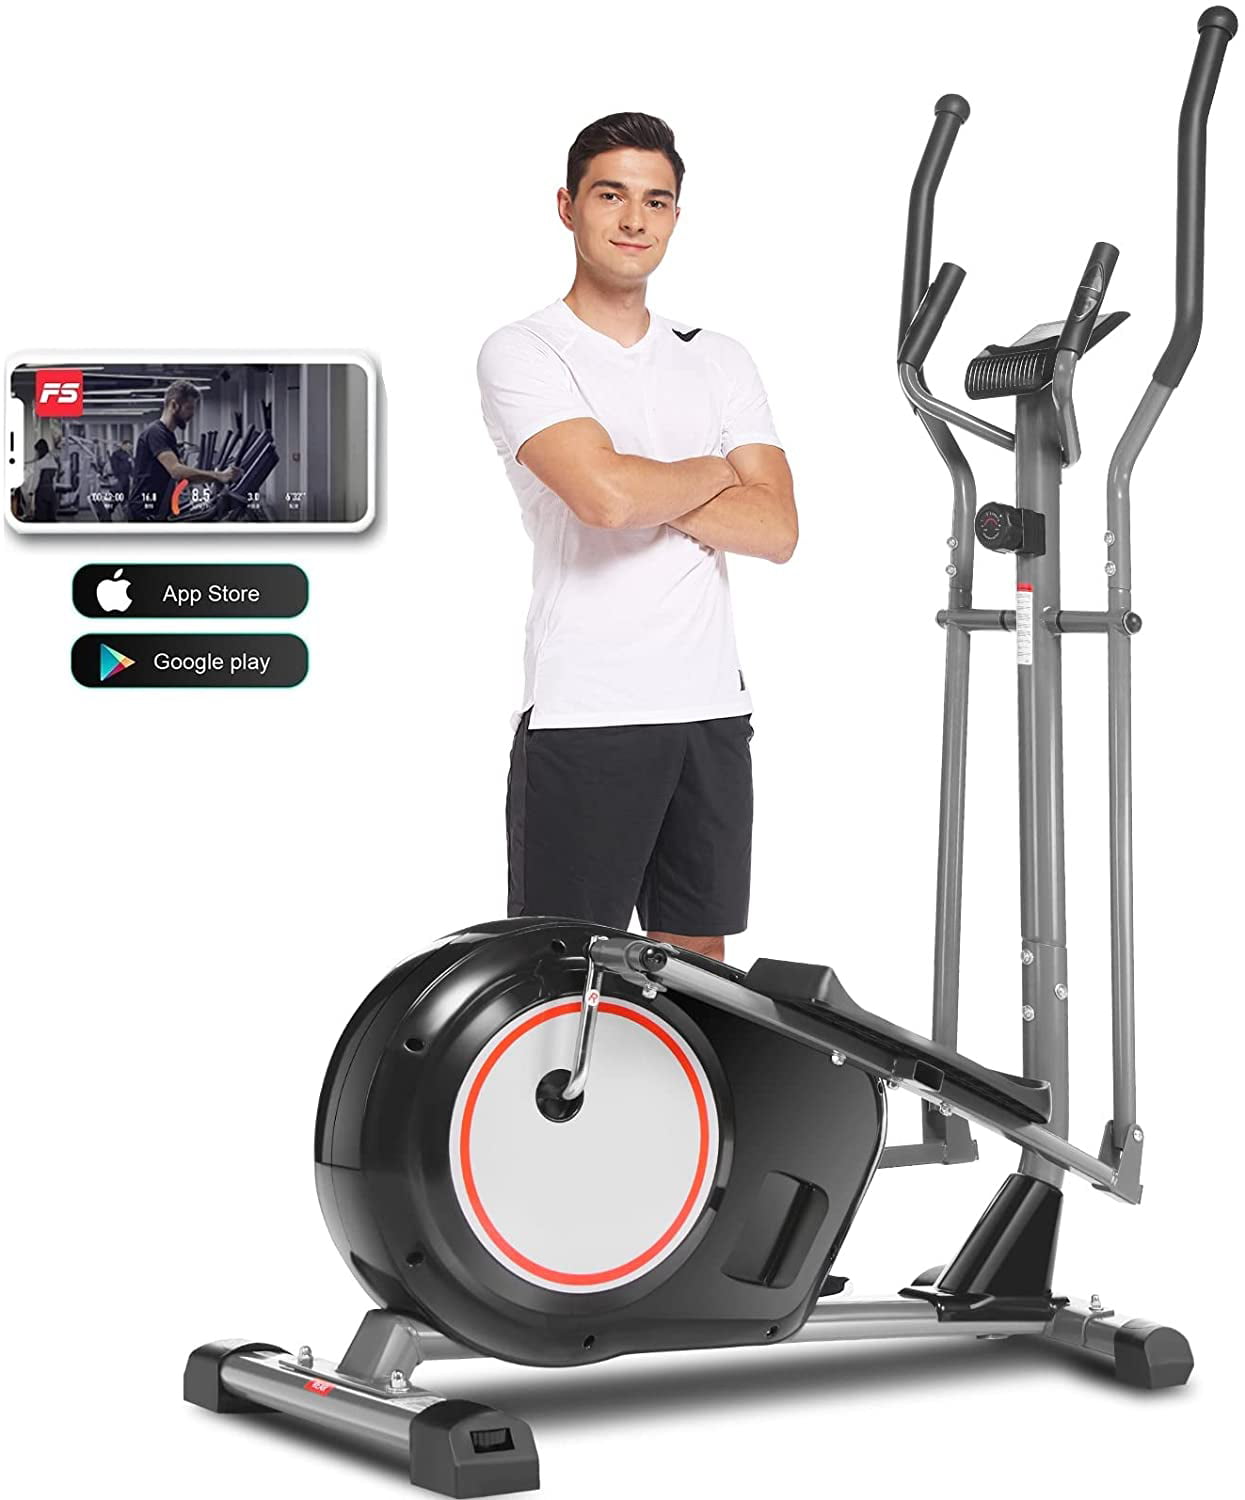 Enhanced LCD Monitor APP Elliptical Trainer Cross Trainer with 10 Levels of Magnetic Resistance Heart Rate Sensor APP & 390 lbs Weight Capacity for Home Gym FUNMILY Elliptical Machine 